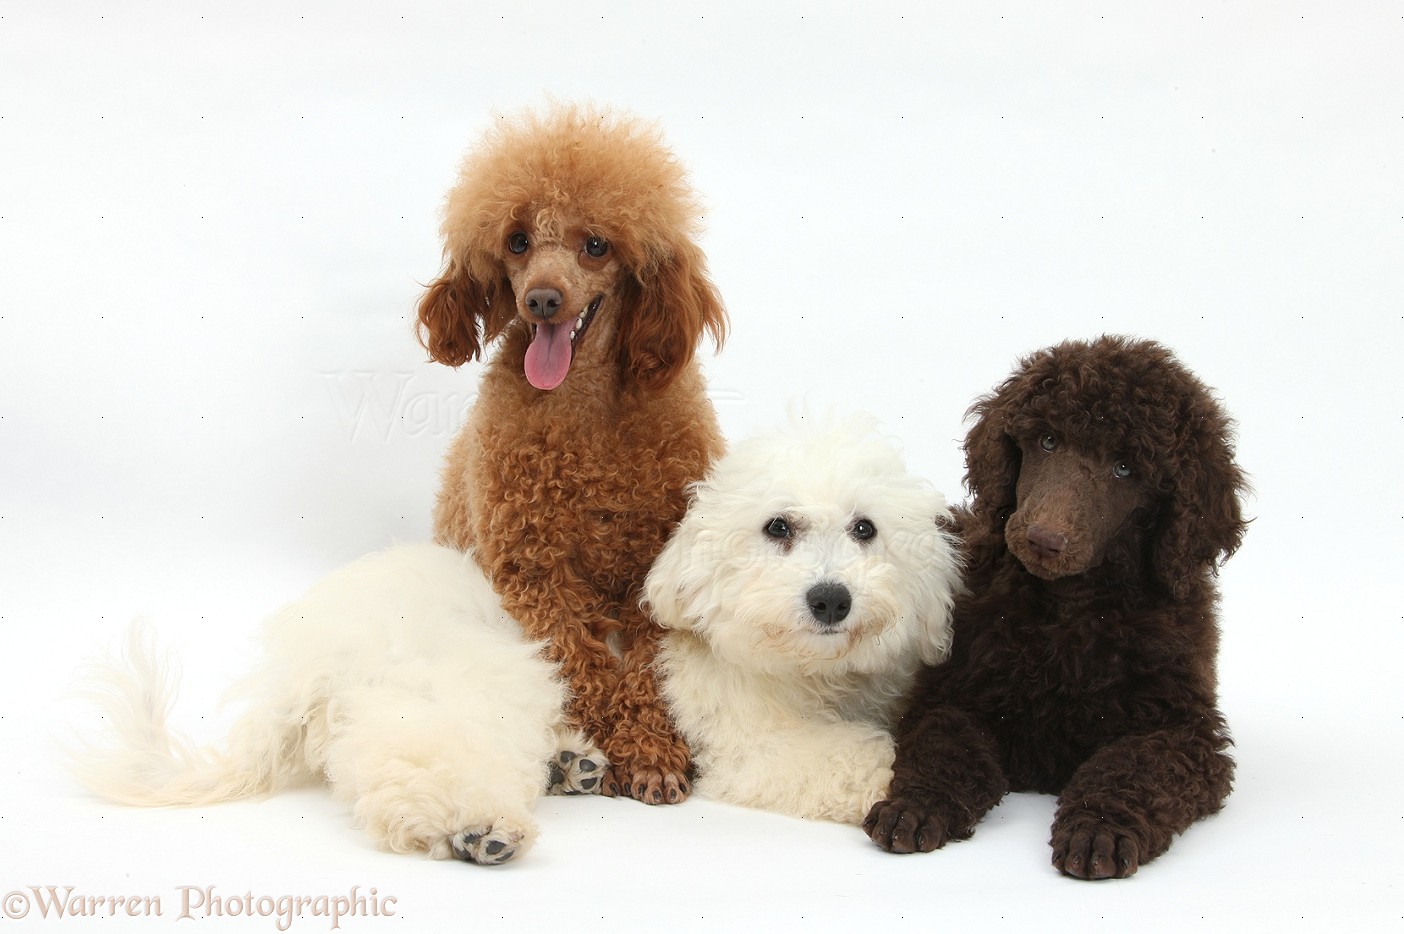 Dogs Bichon Standard Poodle Pup And Adult Toy Photo Wp36079